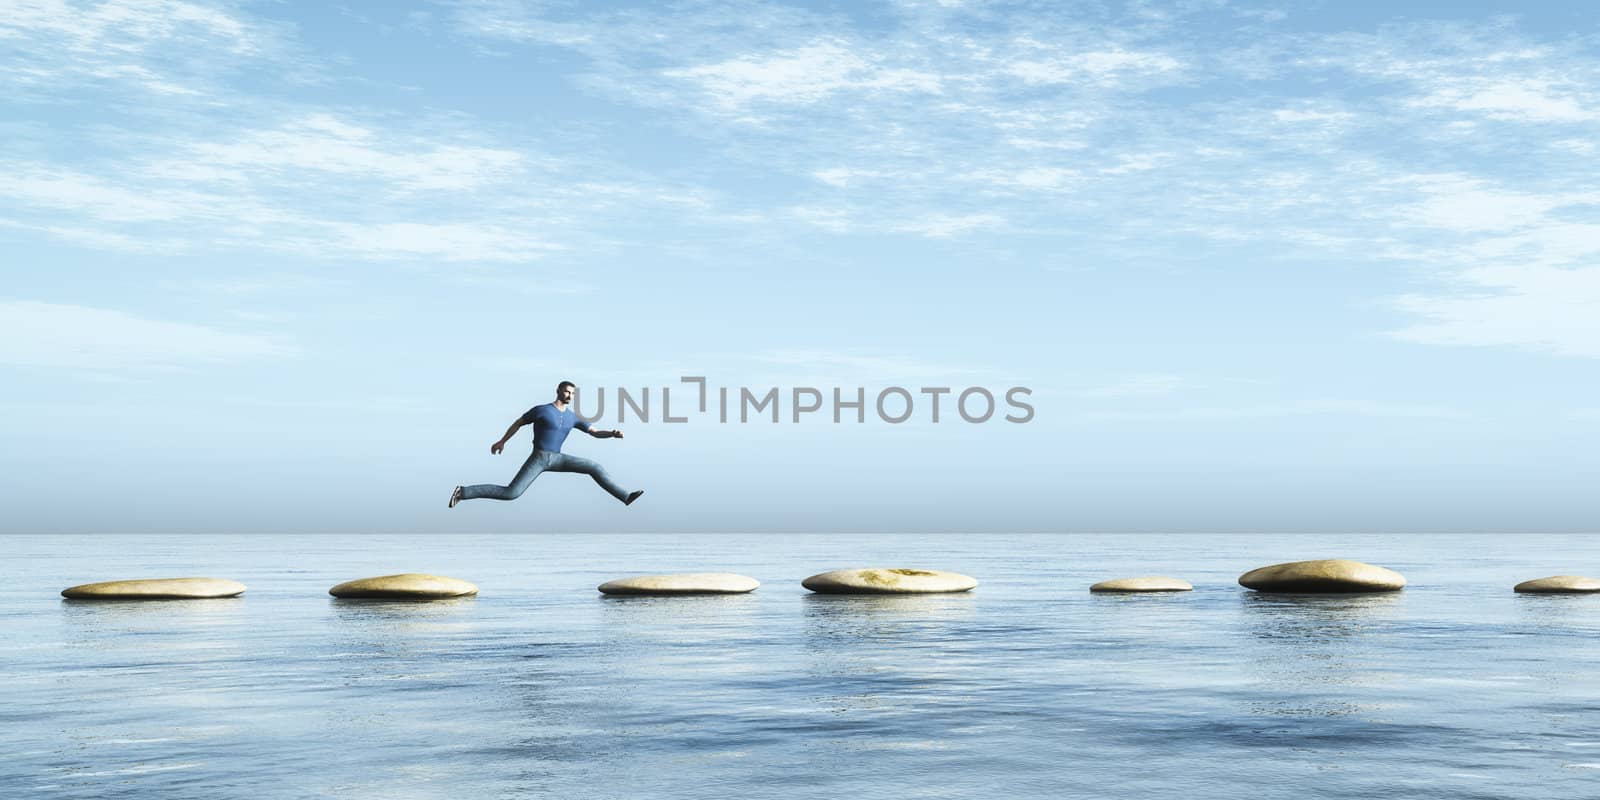 An image of a man jumping from stone to stone